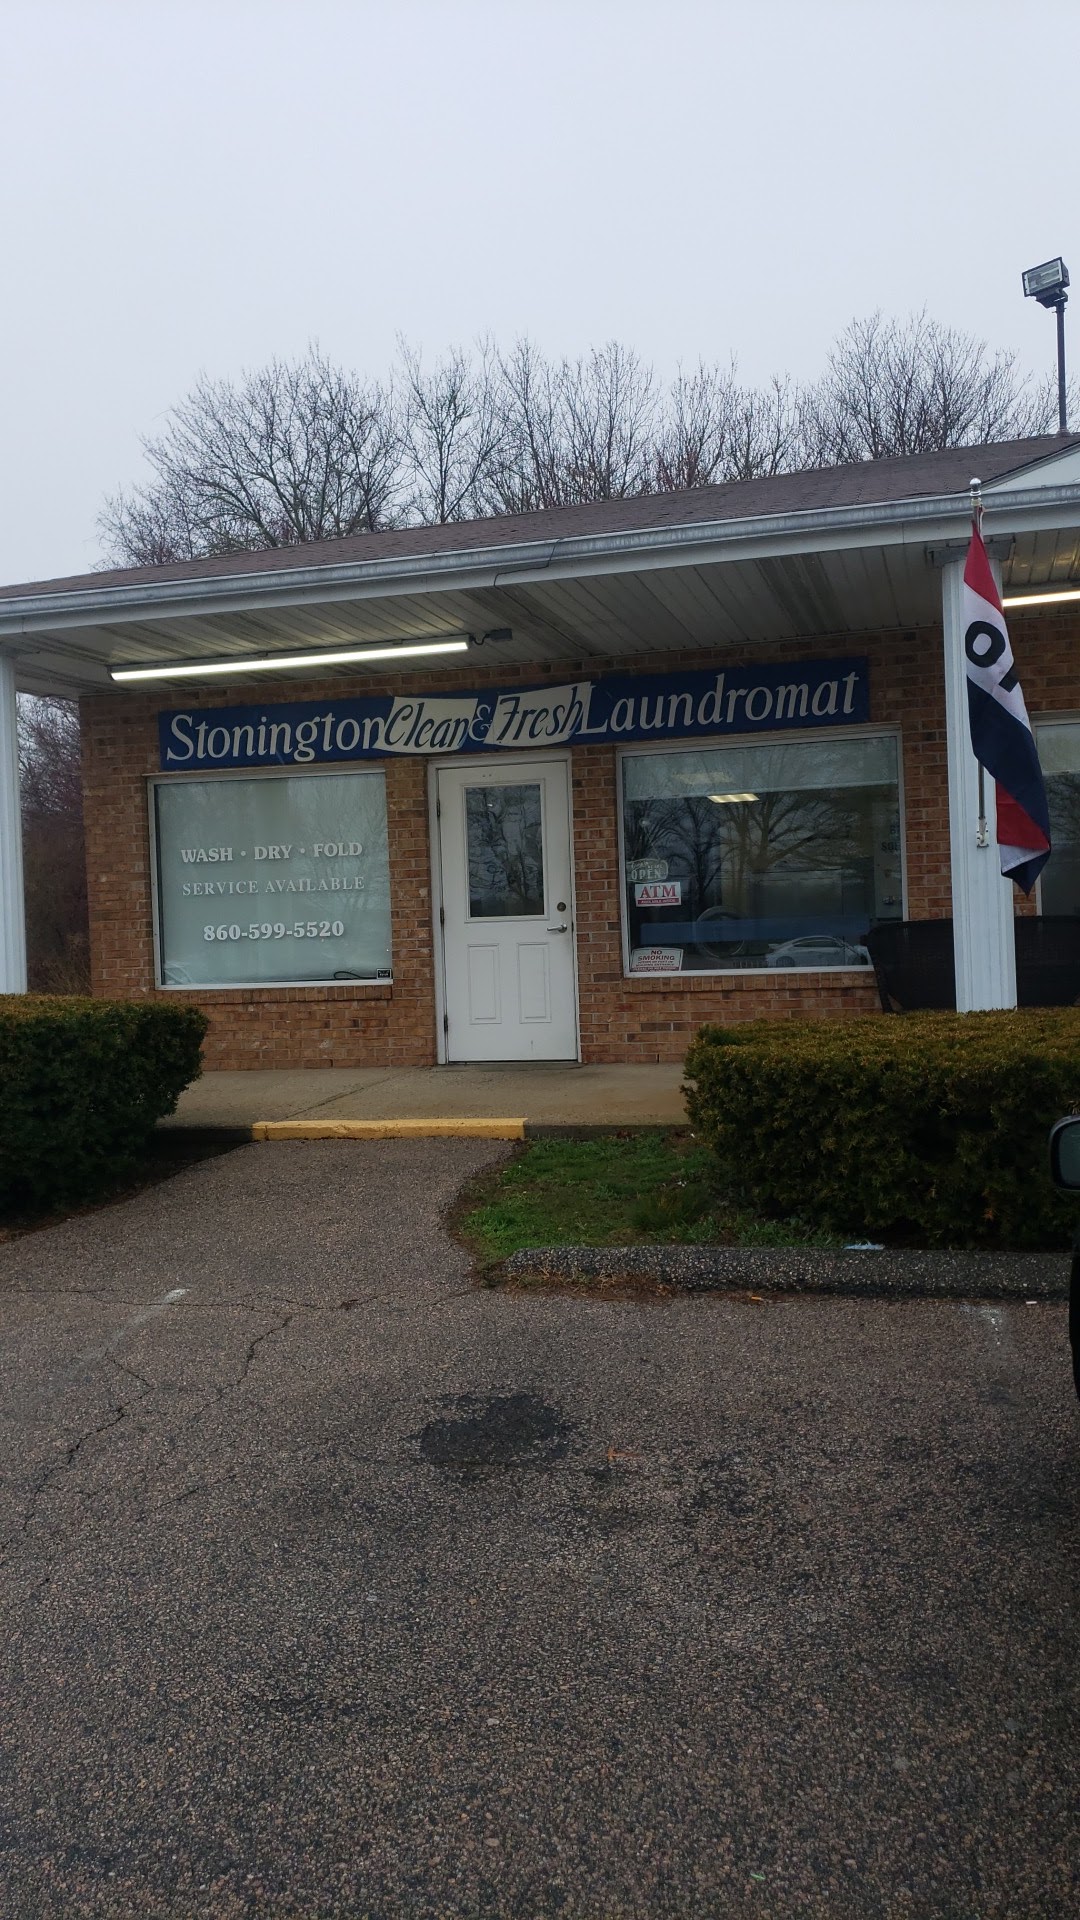 Stonington Clean and Fresh Laundromat 165 S Broad St, Pawcatuck Connecticut 06379